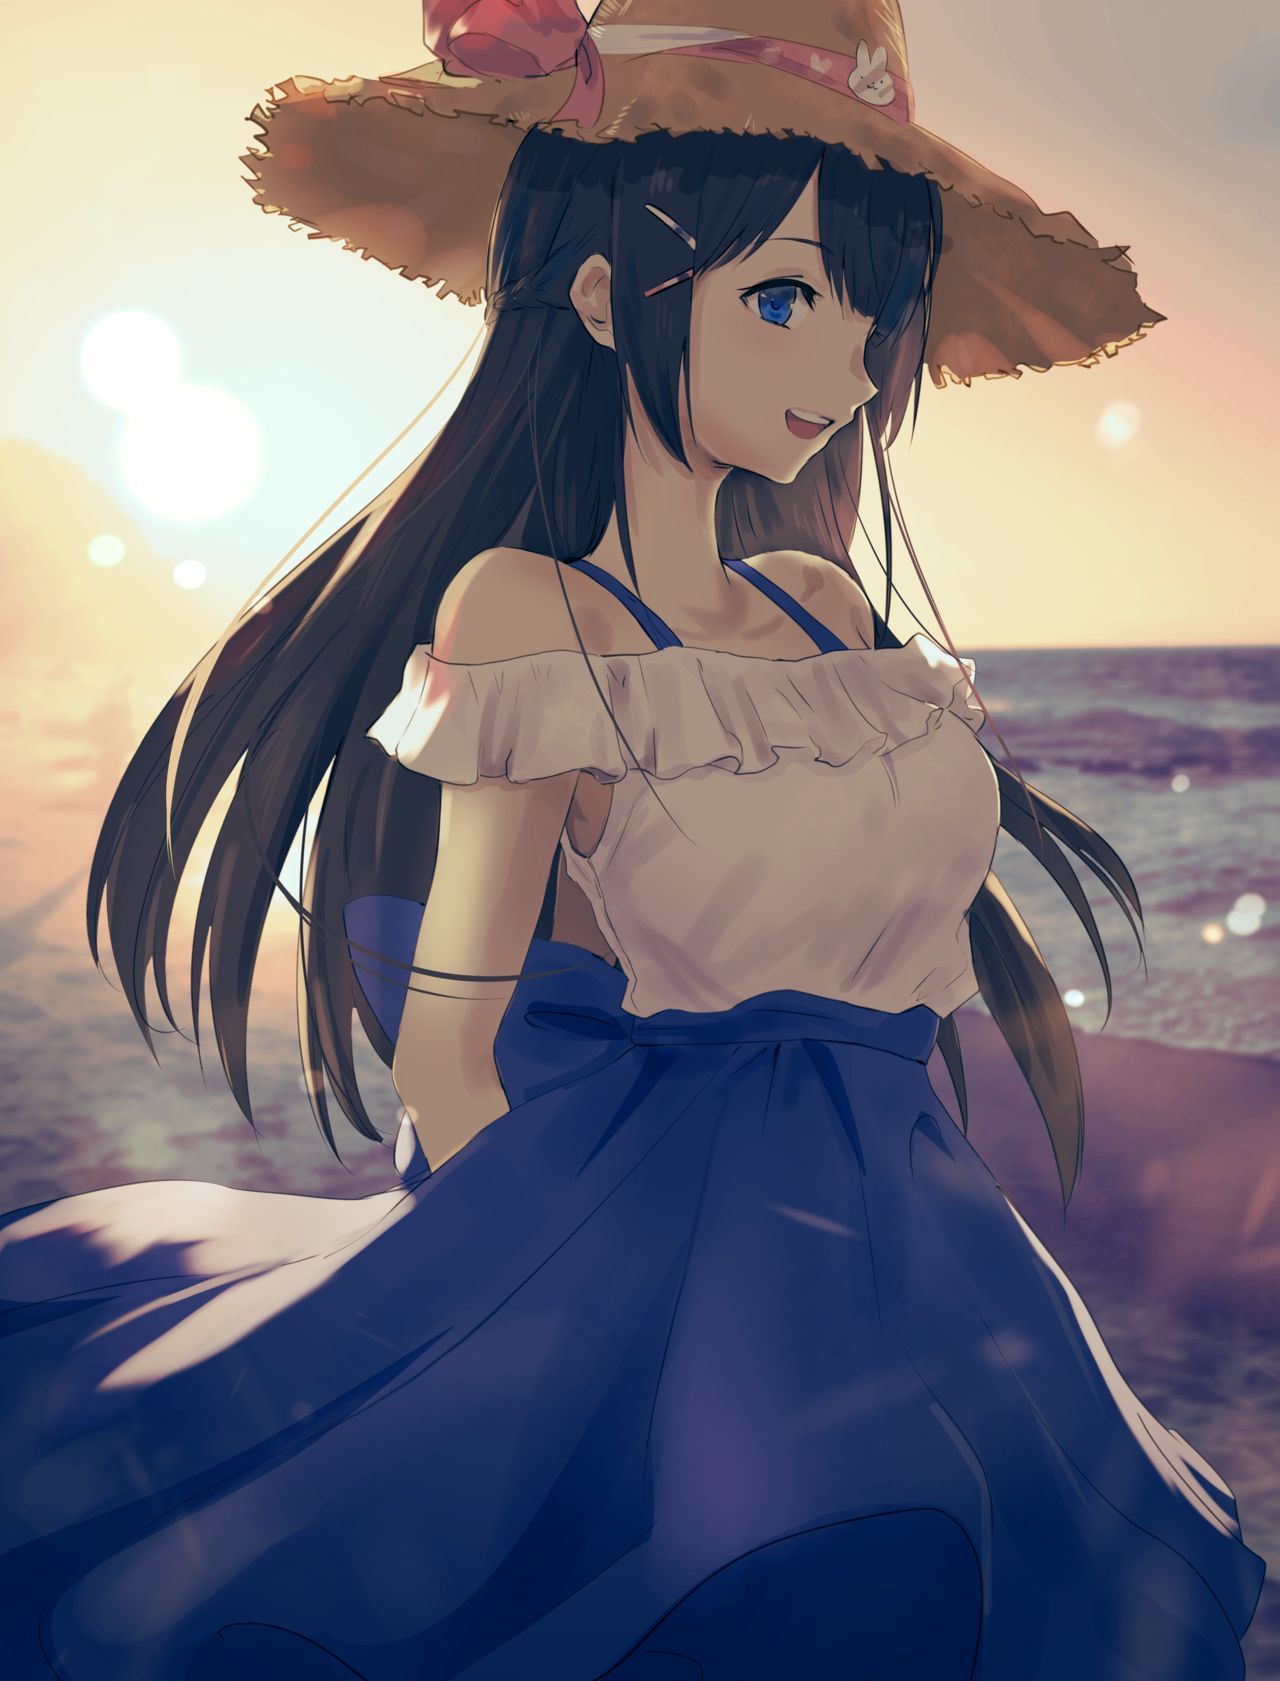 Girls And The Sea 少女与海 19